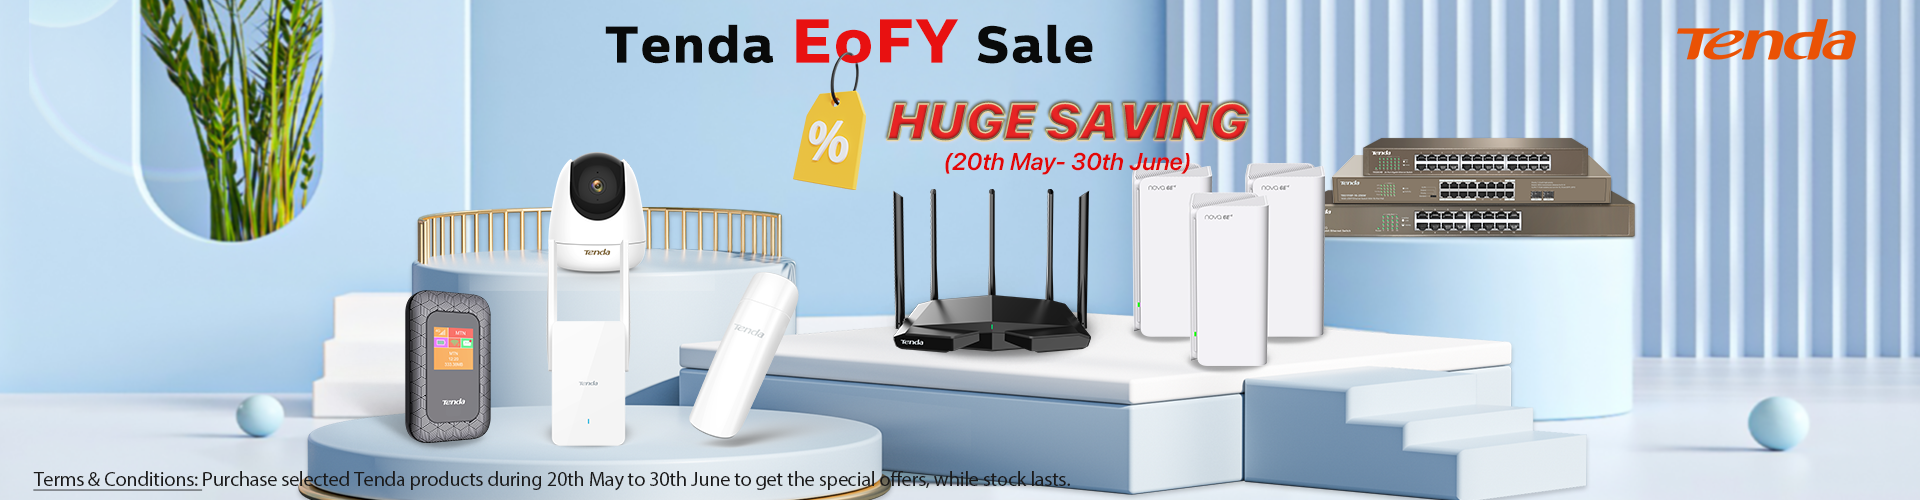 Tenda Father's Day Promotion